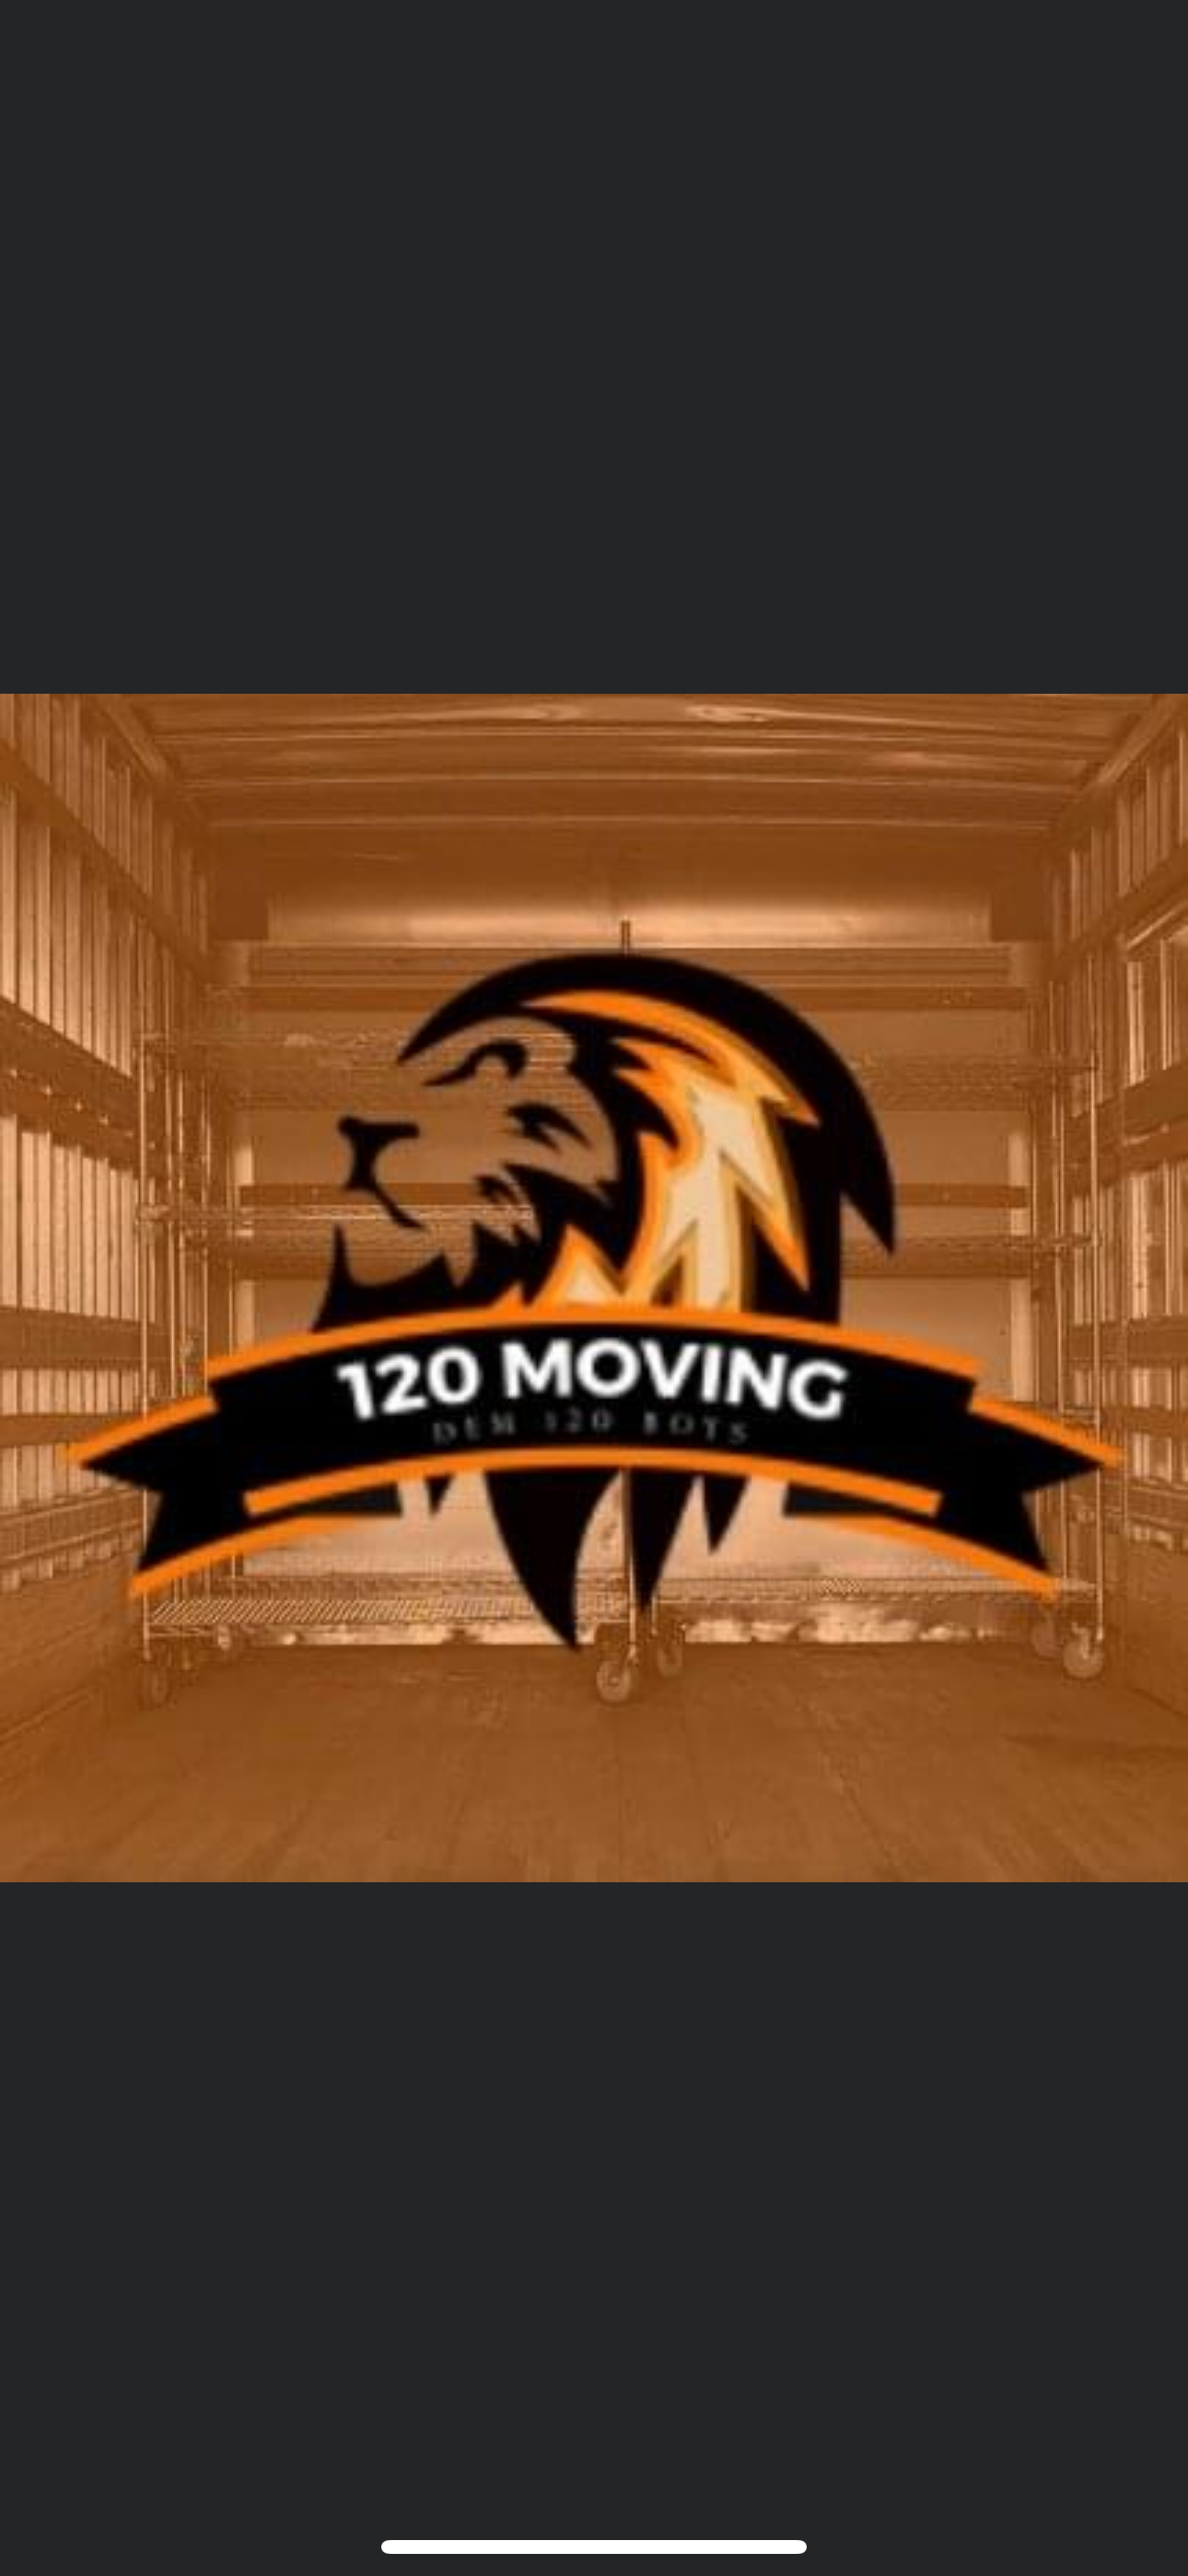 120 moving